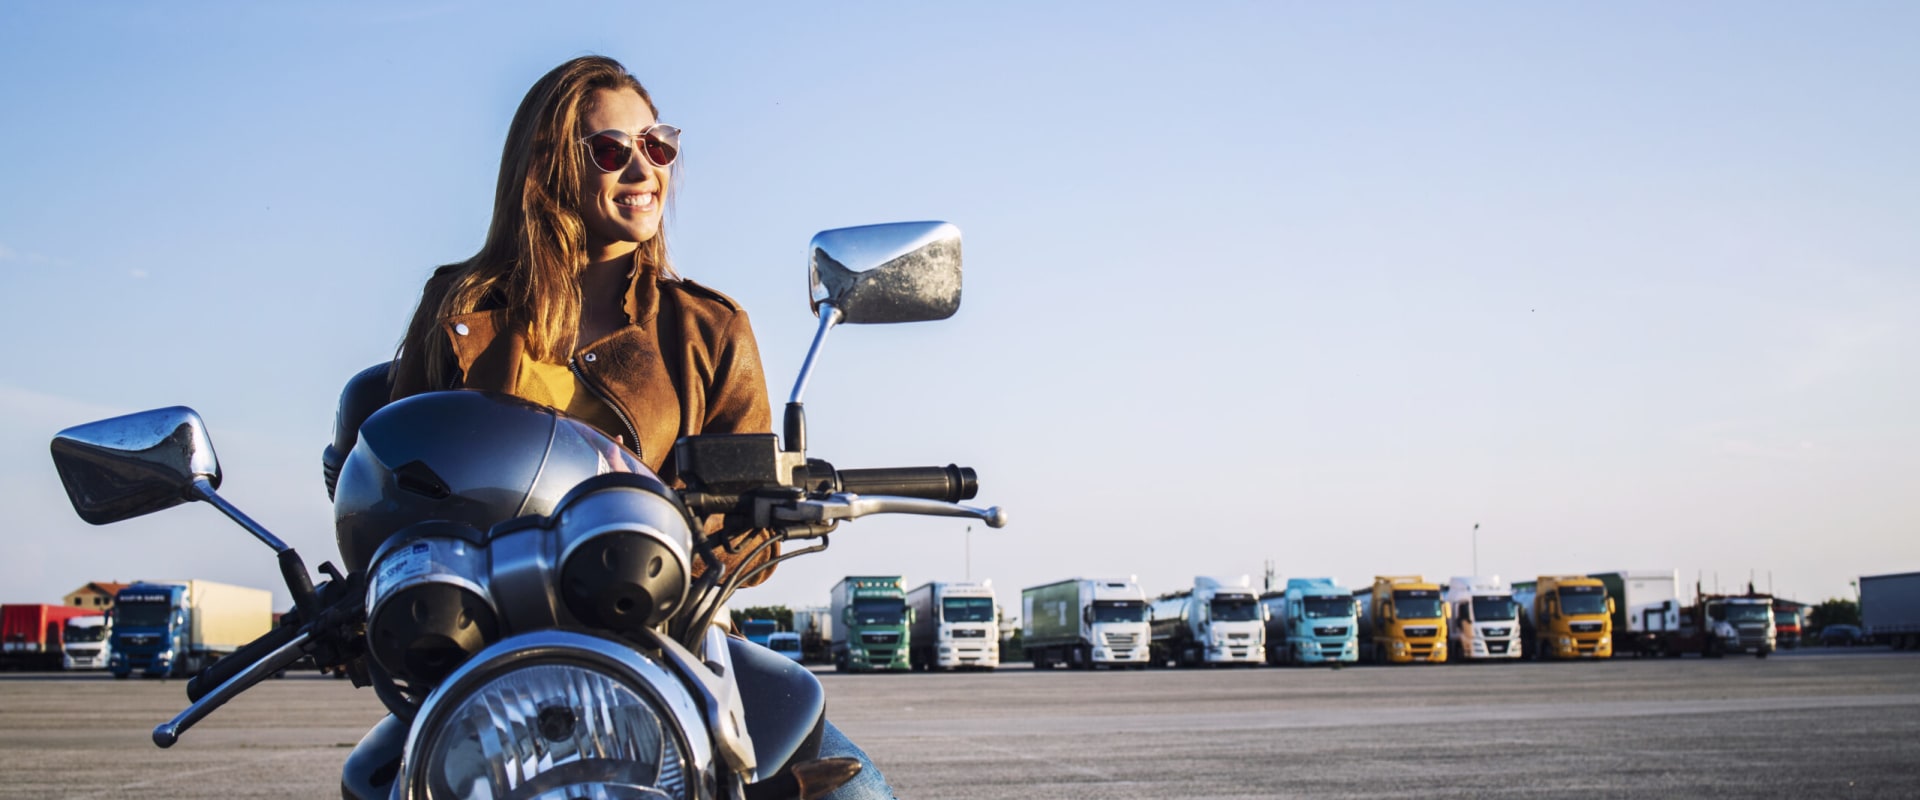 Motorcycle Insurance for an Autocycle in New York